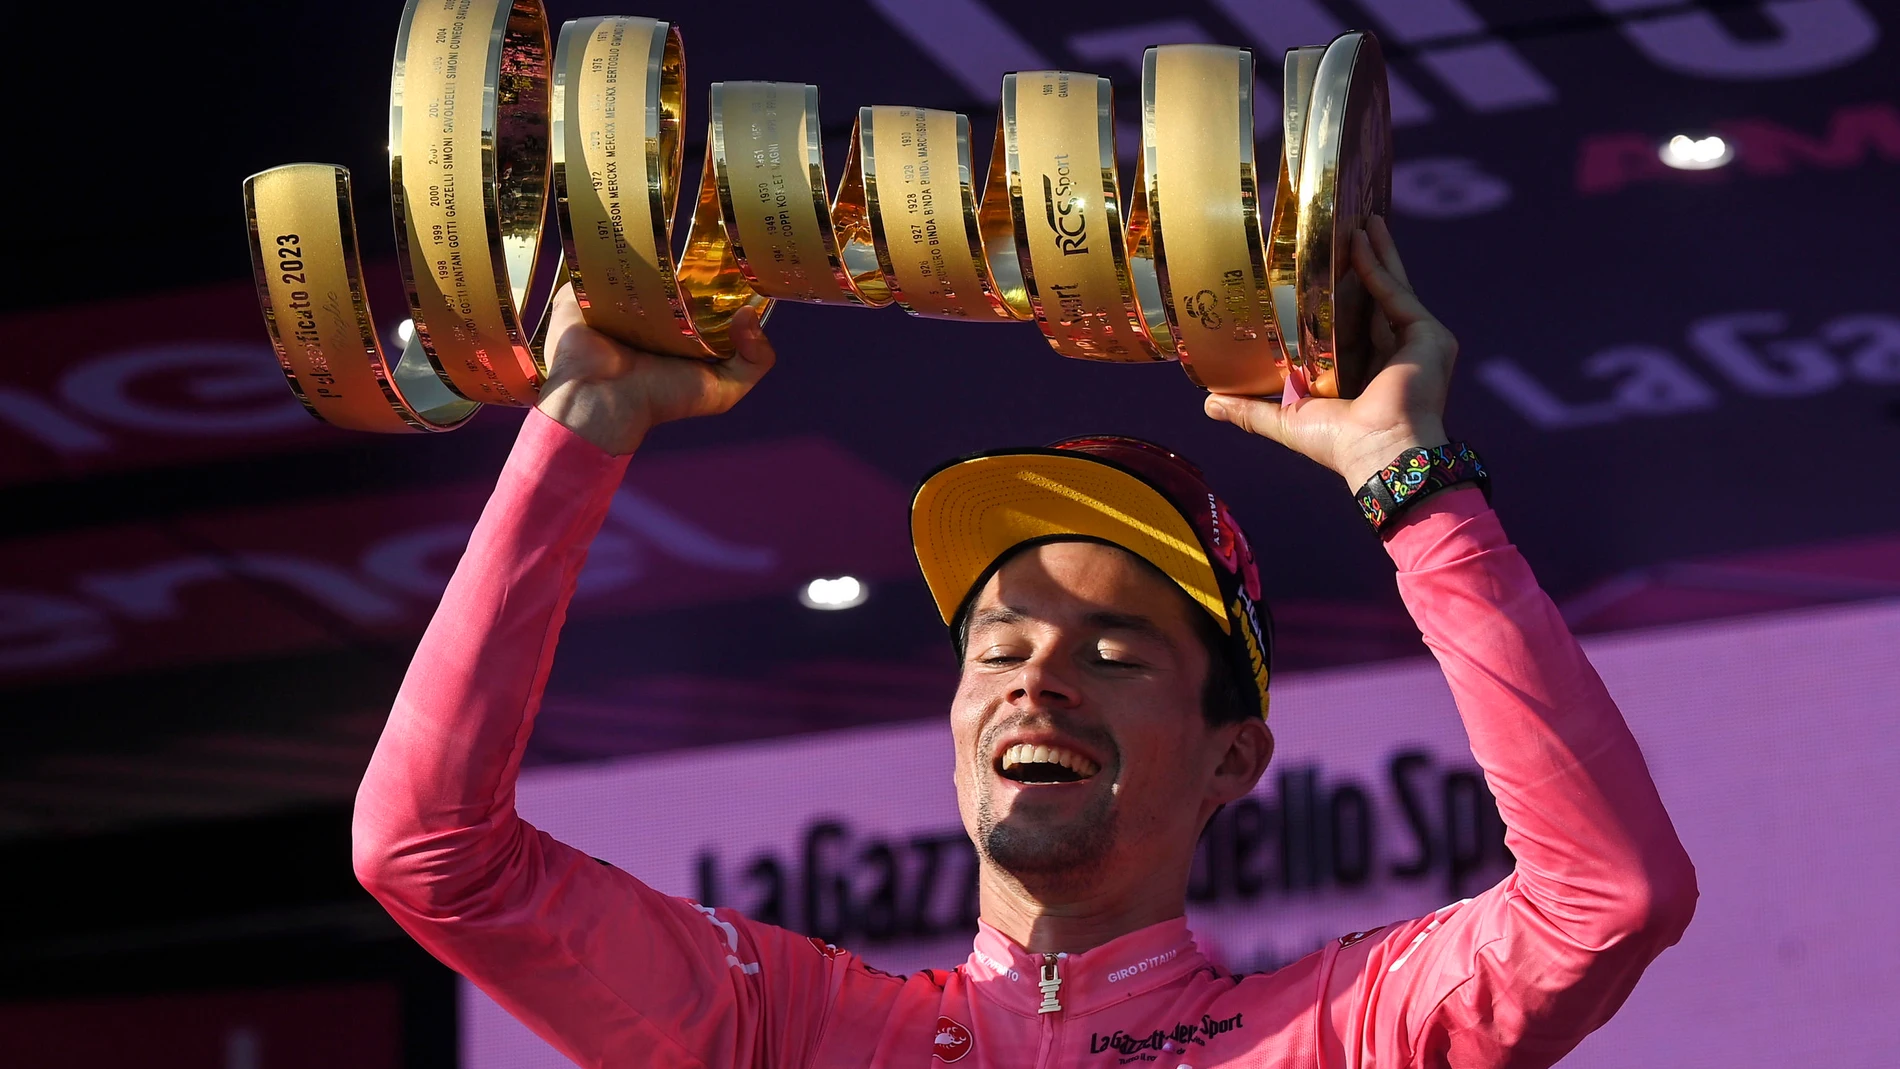 Rome (Italy), 28/05/2023.- Slovenian rider Primoz Roglic, wearing the overall leader's pink jersey, lifts the trophy on the podium after winning the 2023 Giro d'Italia cycling race, in Rome, Italy, 28 May 2023. (Ciclismo, Italia, Eslovenia, Roma) EFE/EPA/RICCARDO ANTIMIANI 